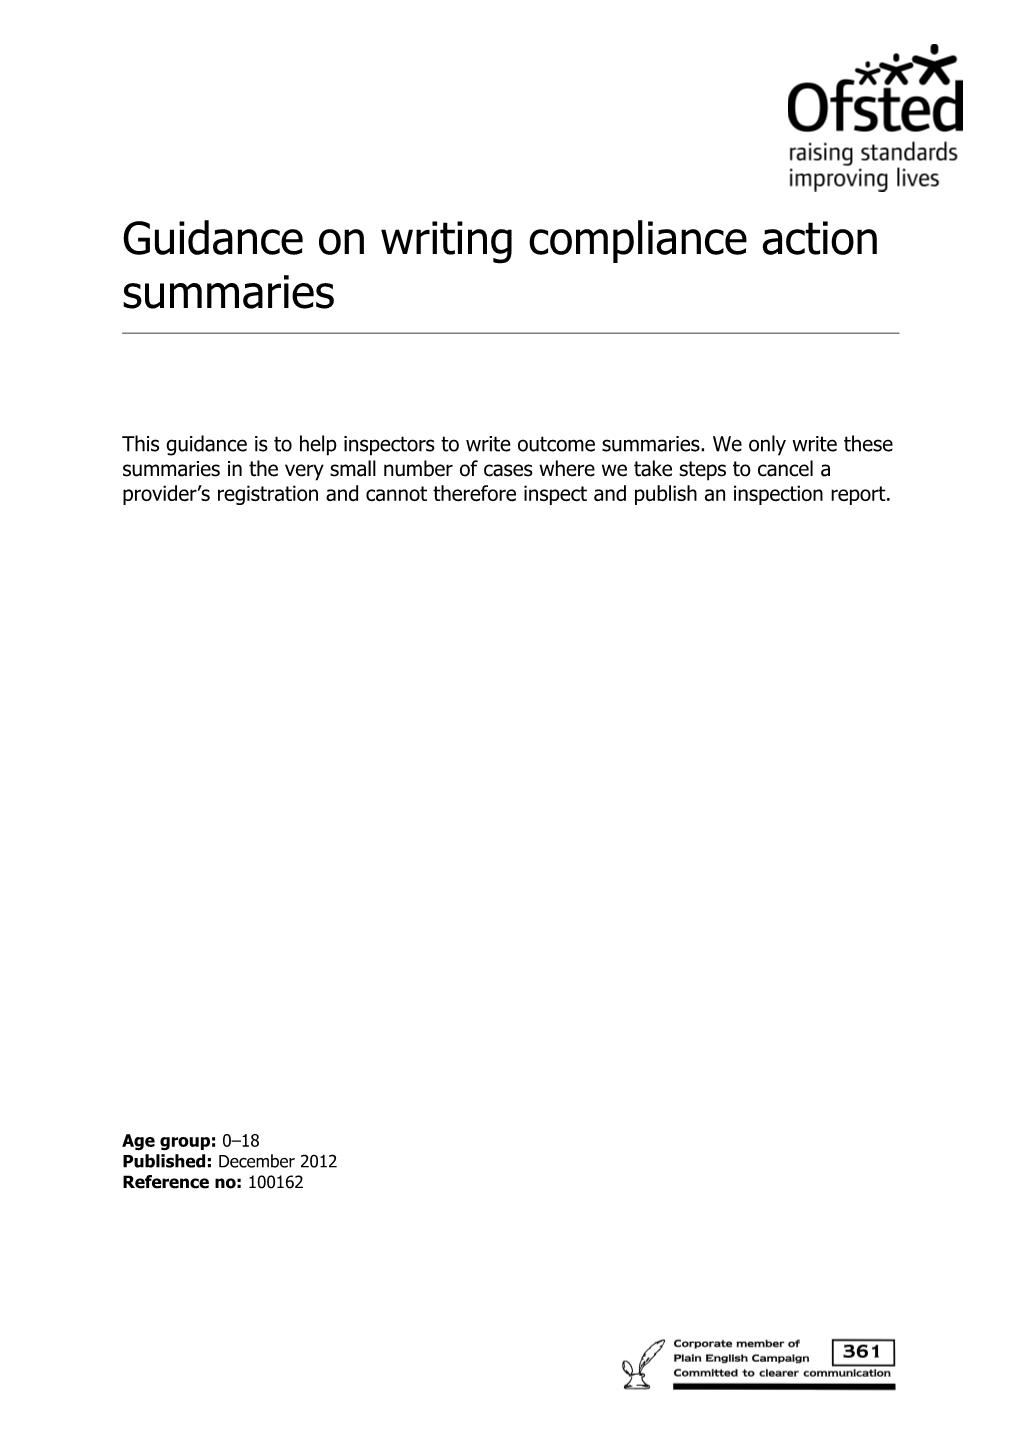 Guidance on Writing Compliance Action Summaries